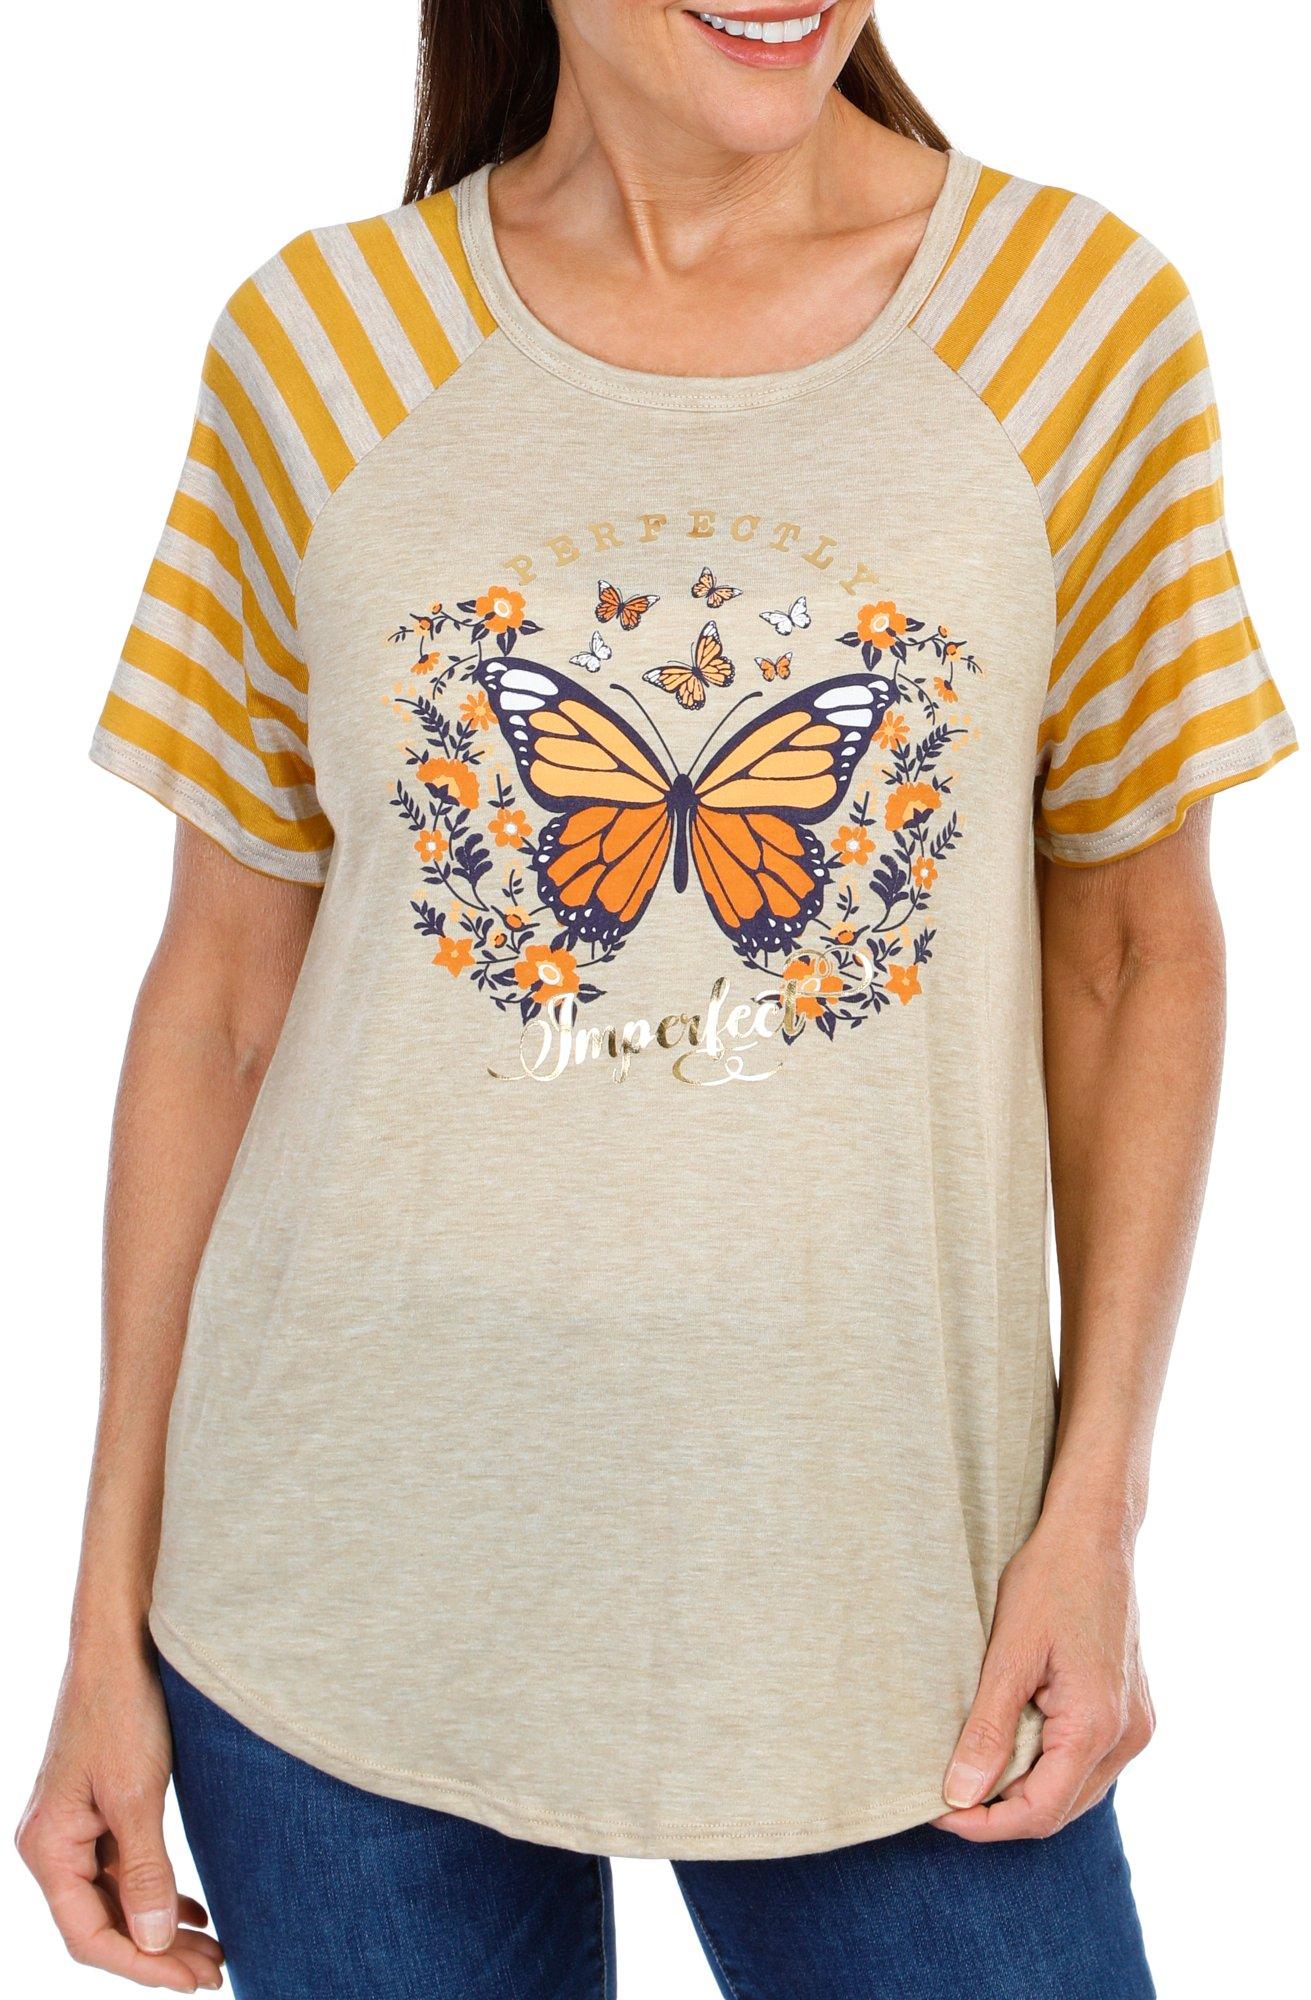 Women's Butterfly Graphic Top